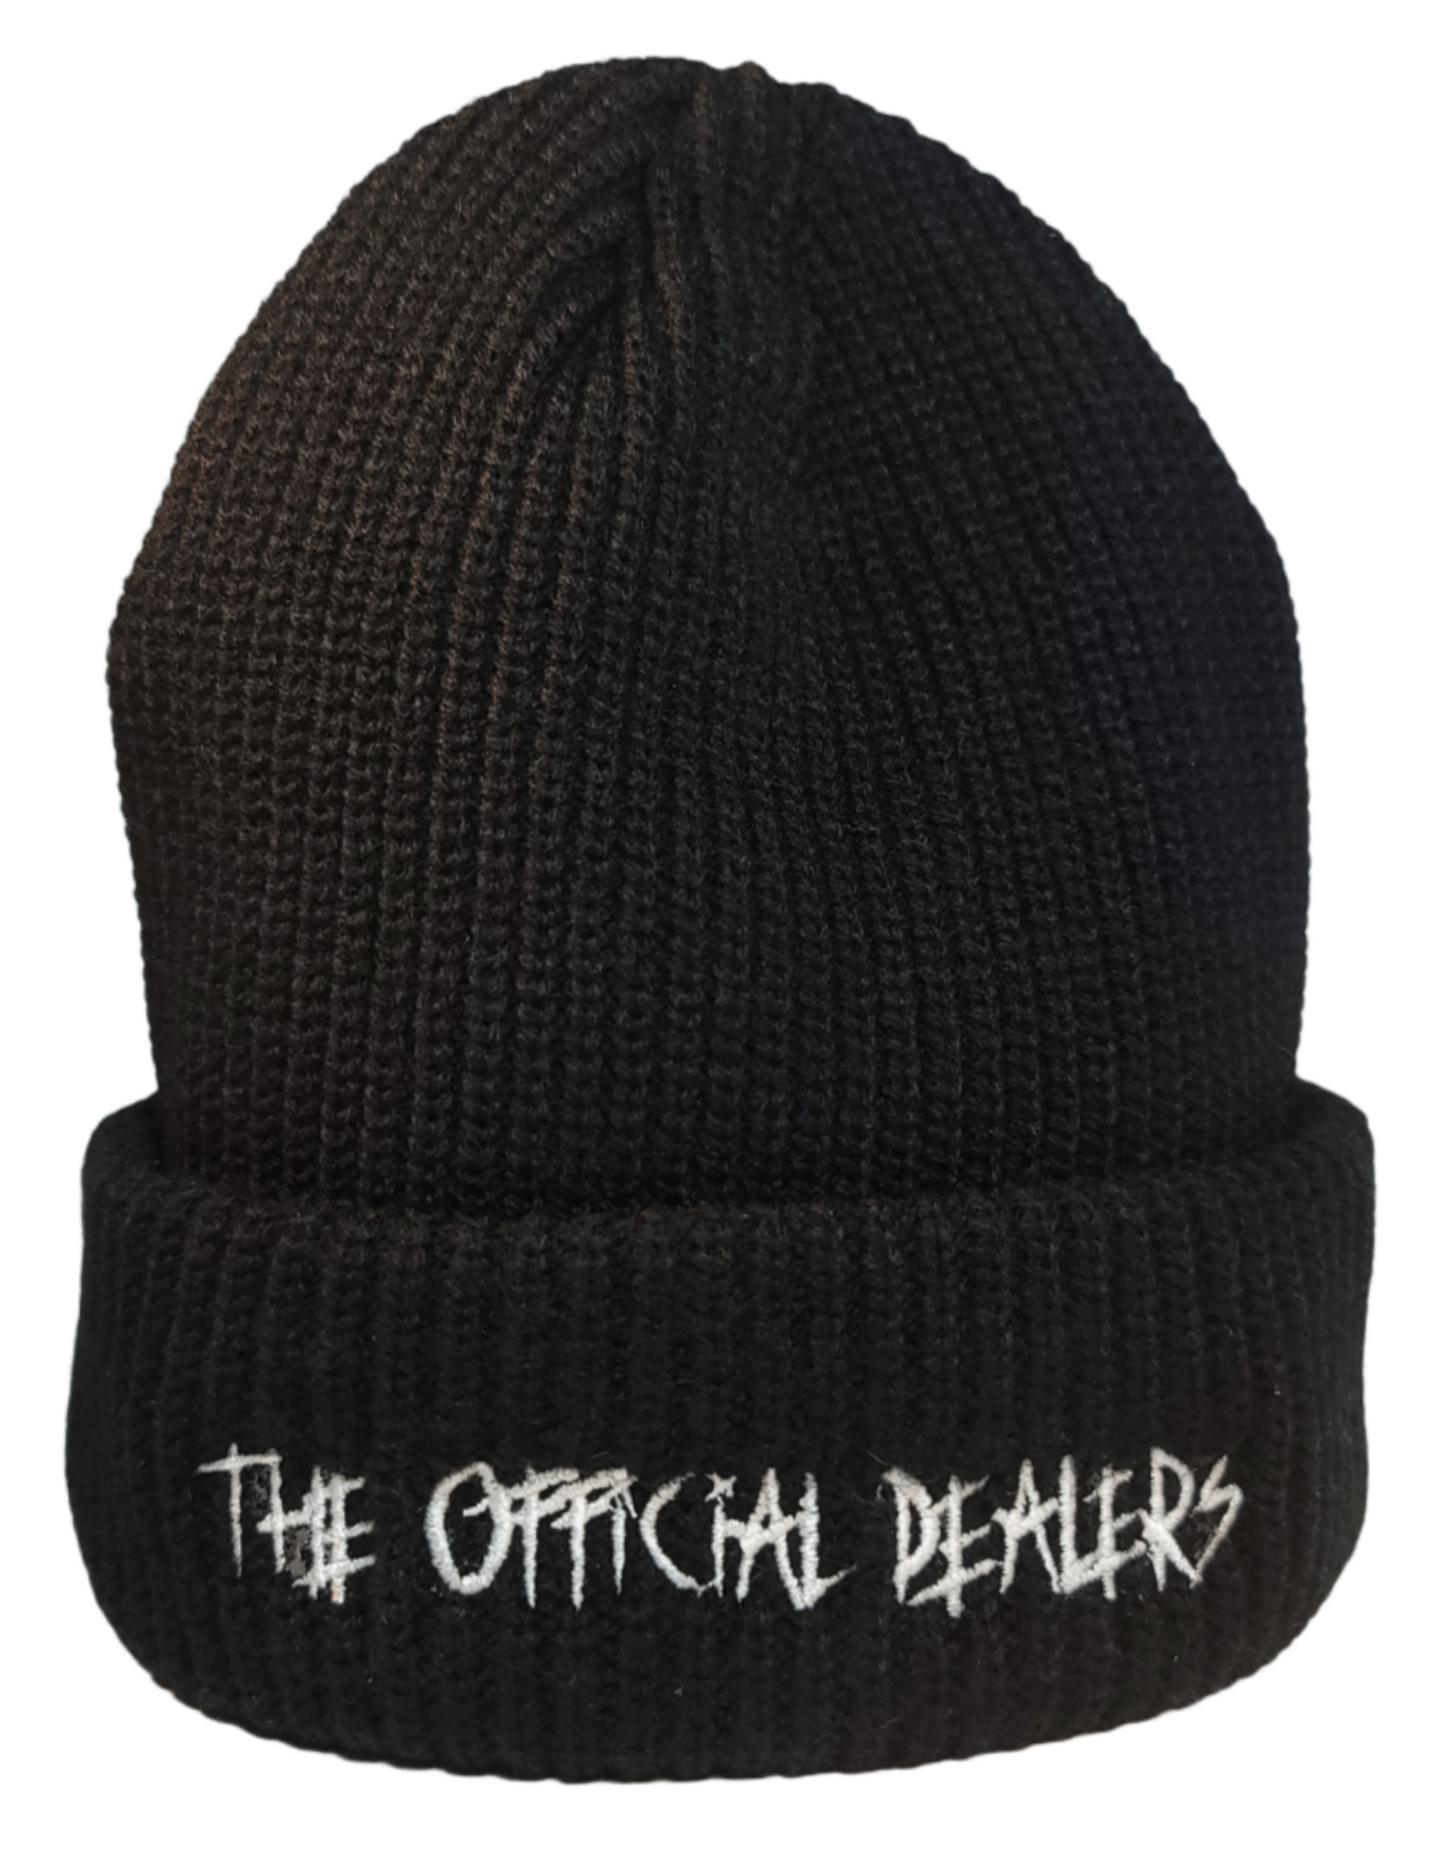 The Official Dealers Double Knit Onyx Black Beanie - The Official Dealers